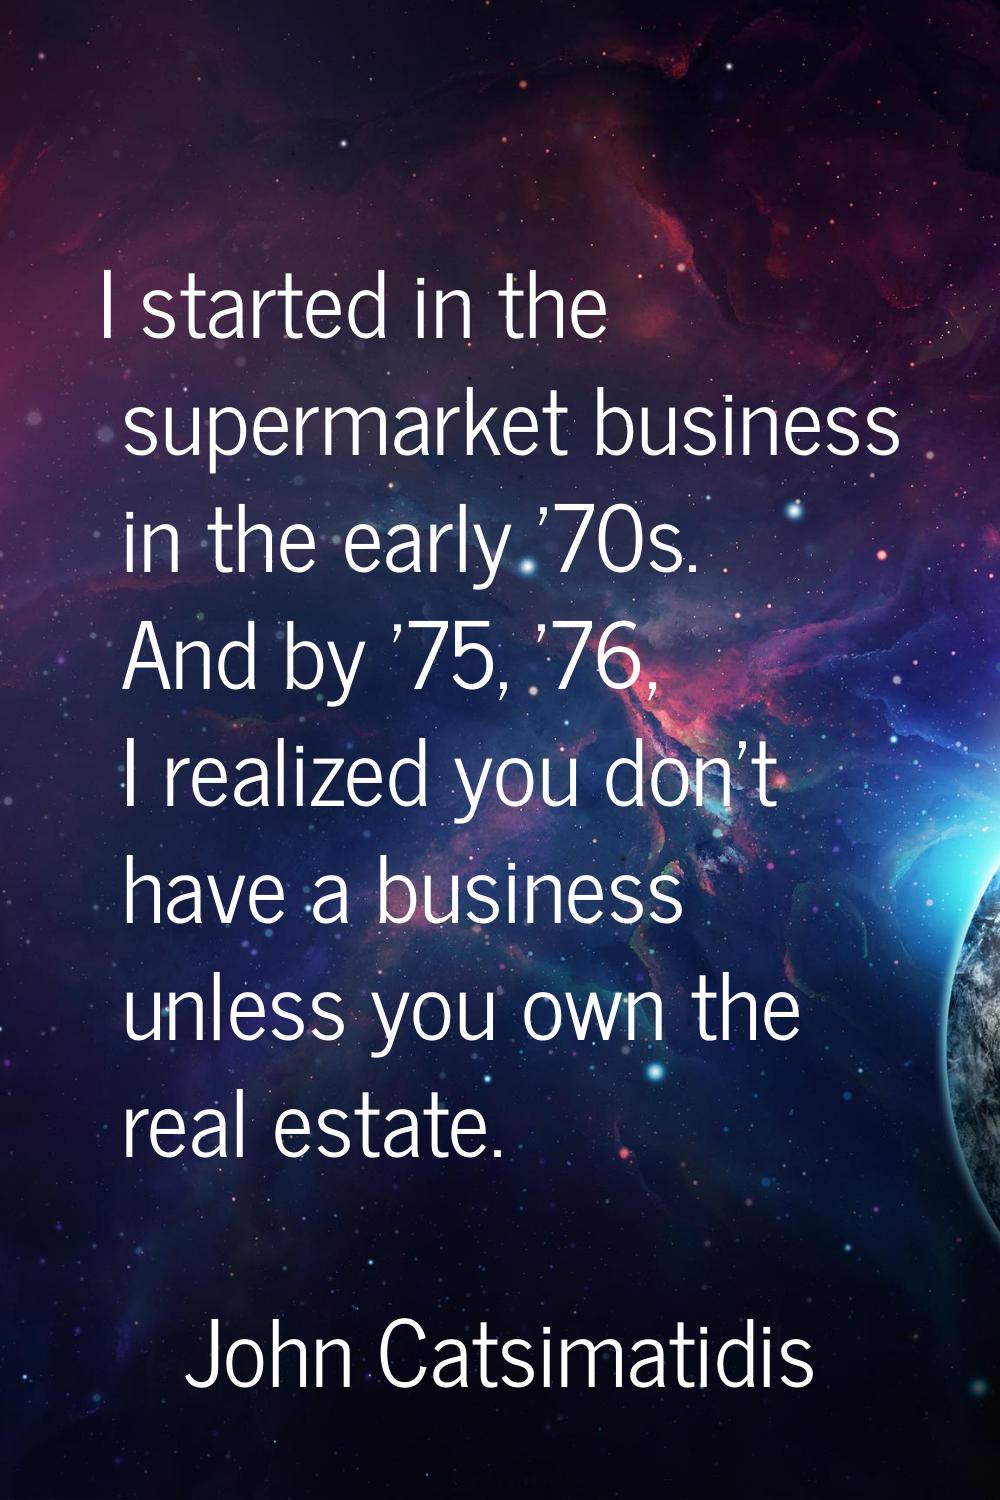 I started in the supermarket business in the early '70s. And by '75, '76, I realized you don't have